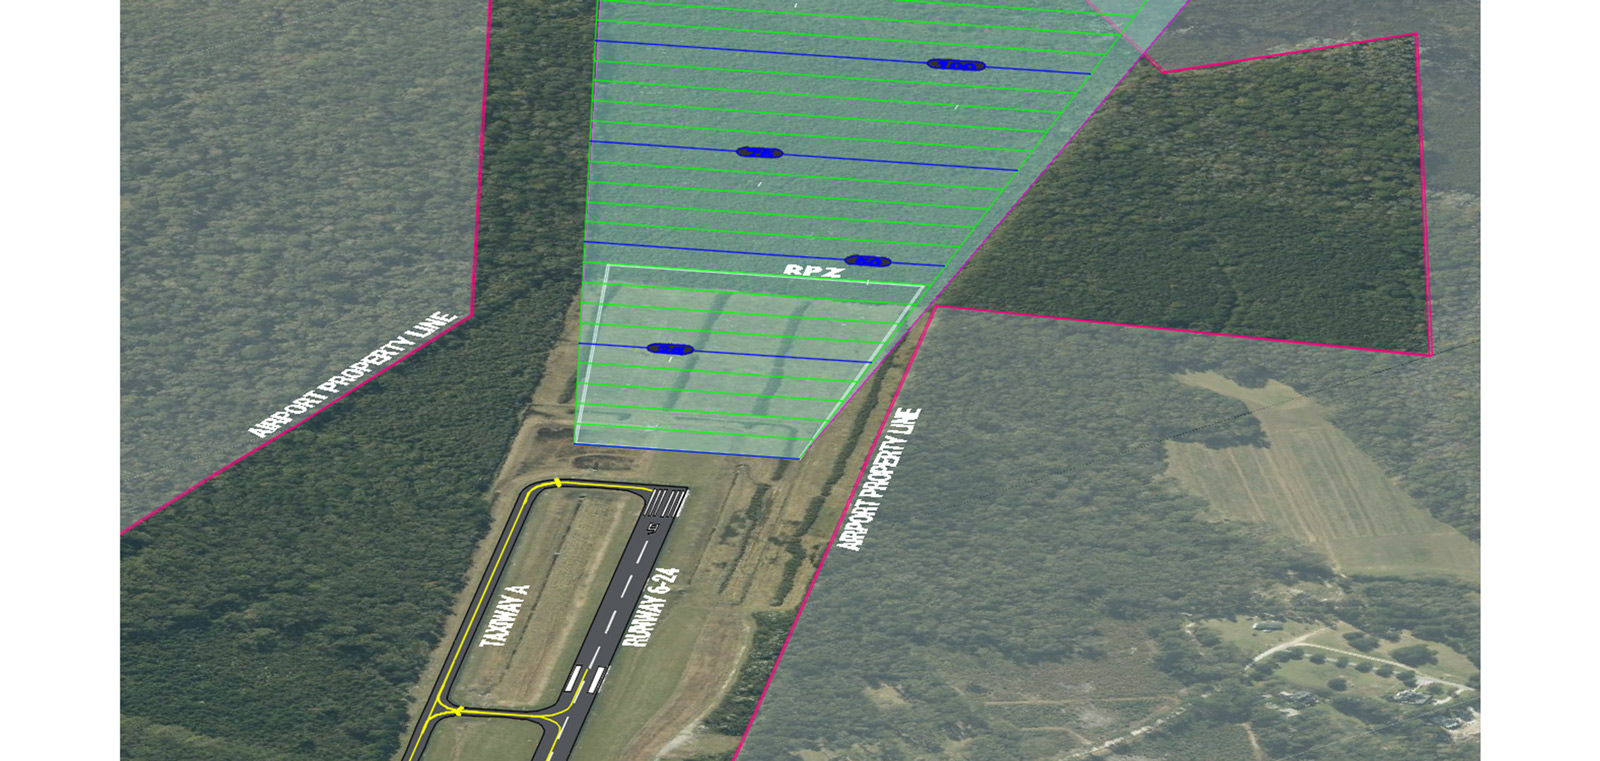 RUNWAY 6 APPROACH OBSTRUCTION REMOVAL SUMMERVILLE AIRPORT (DYB)